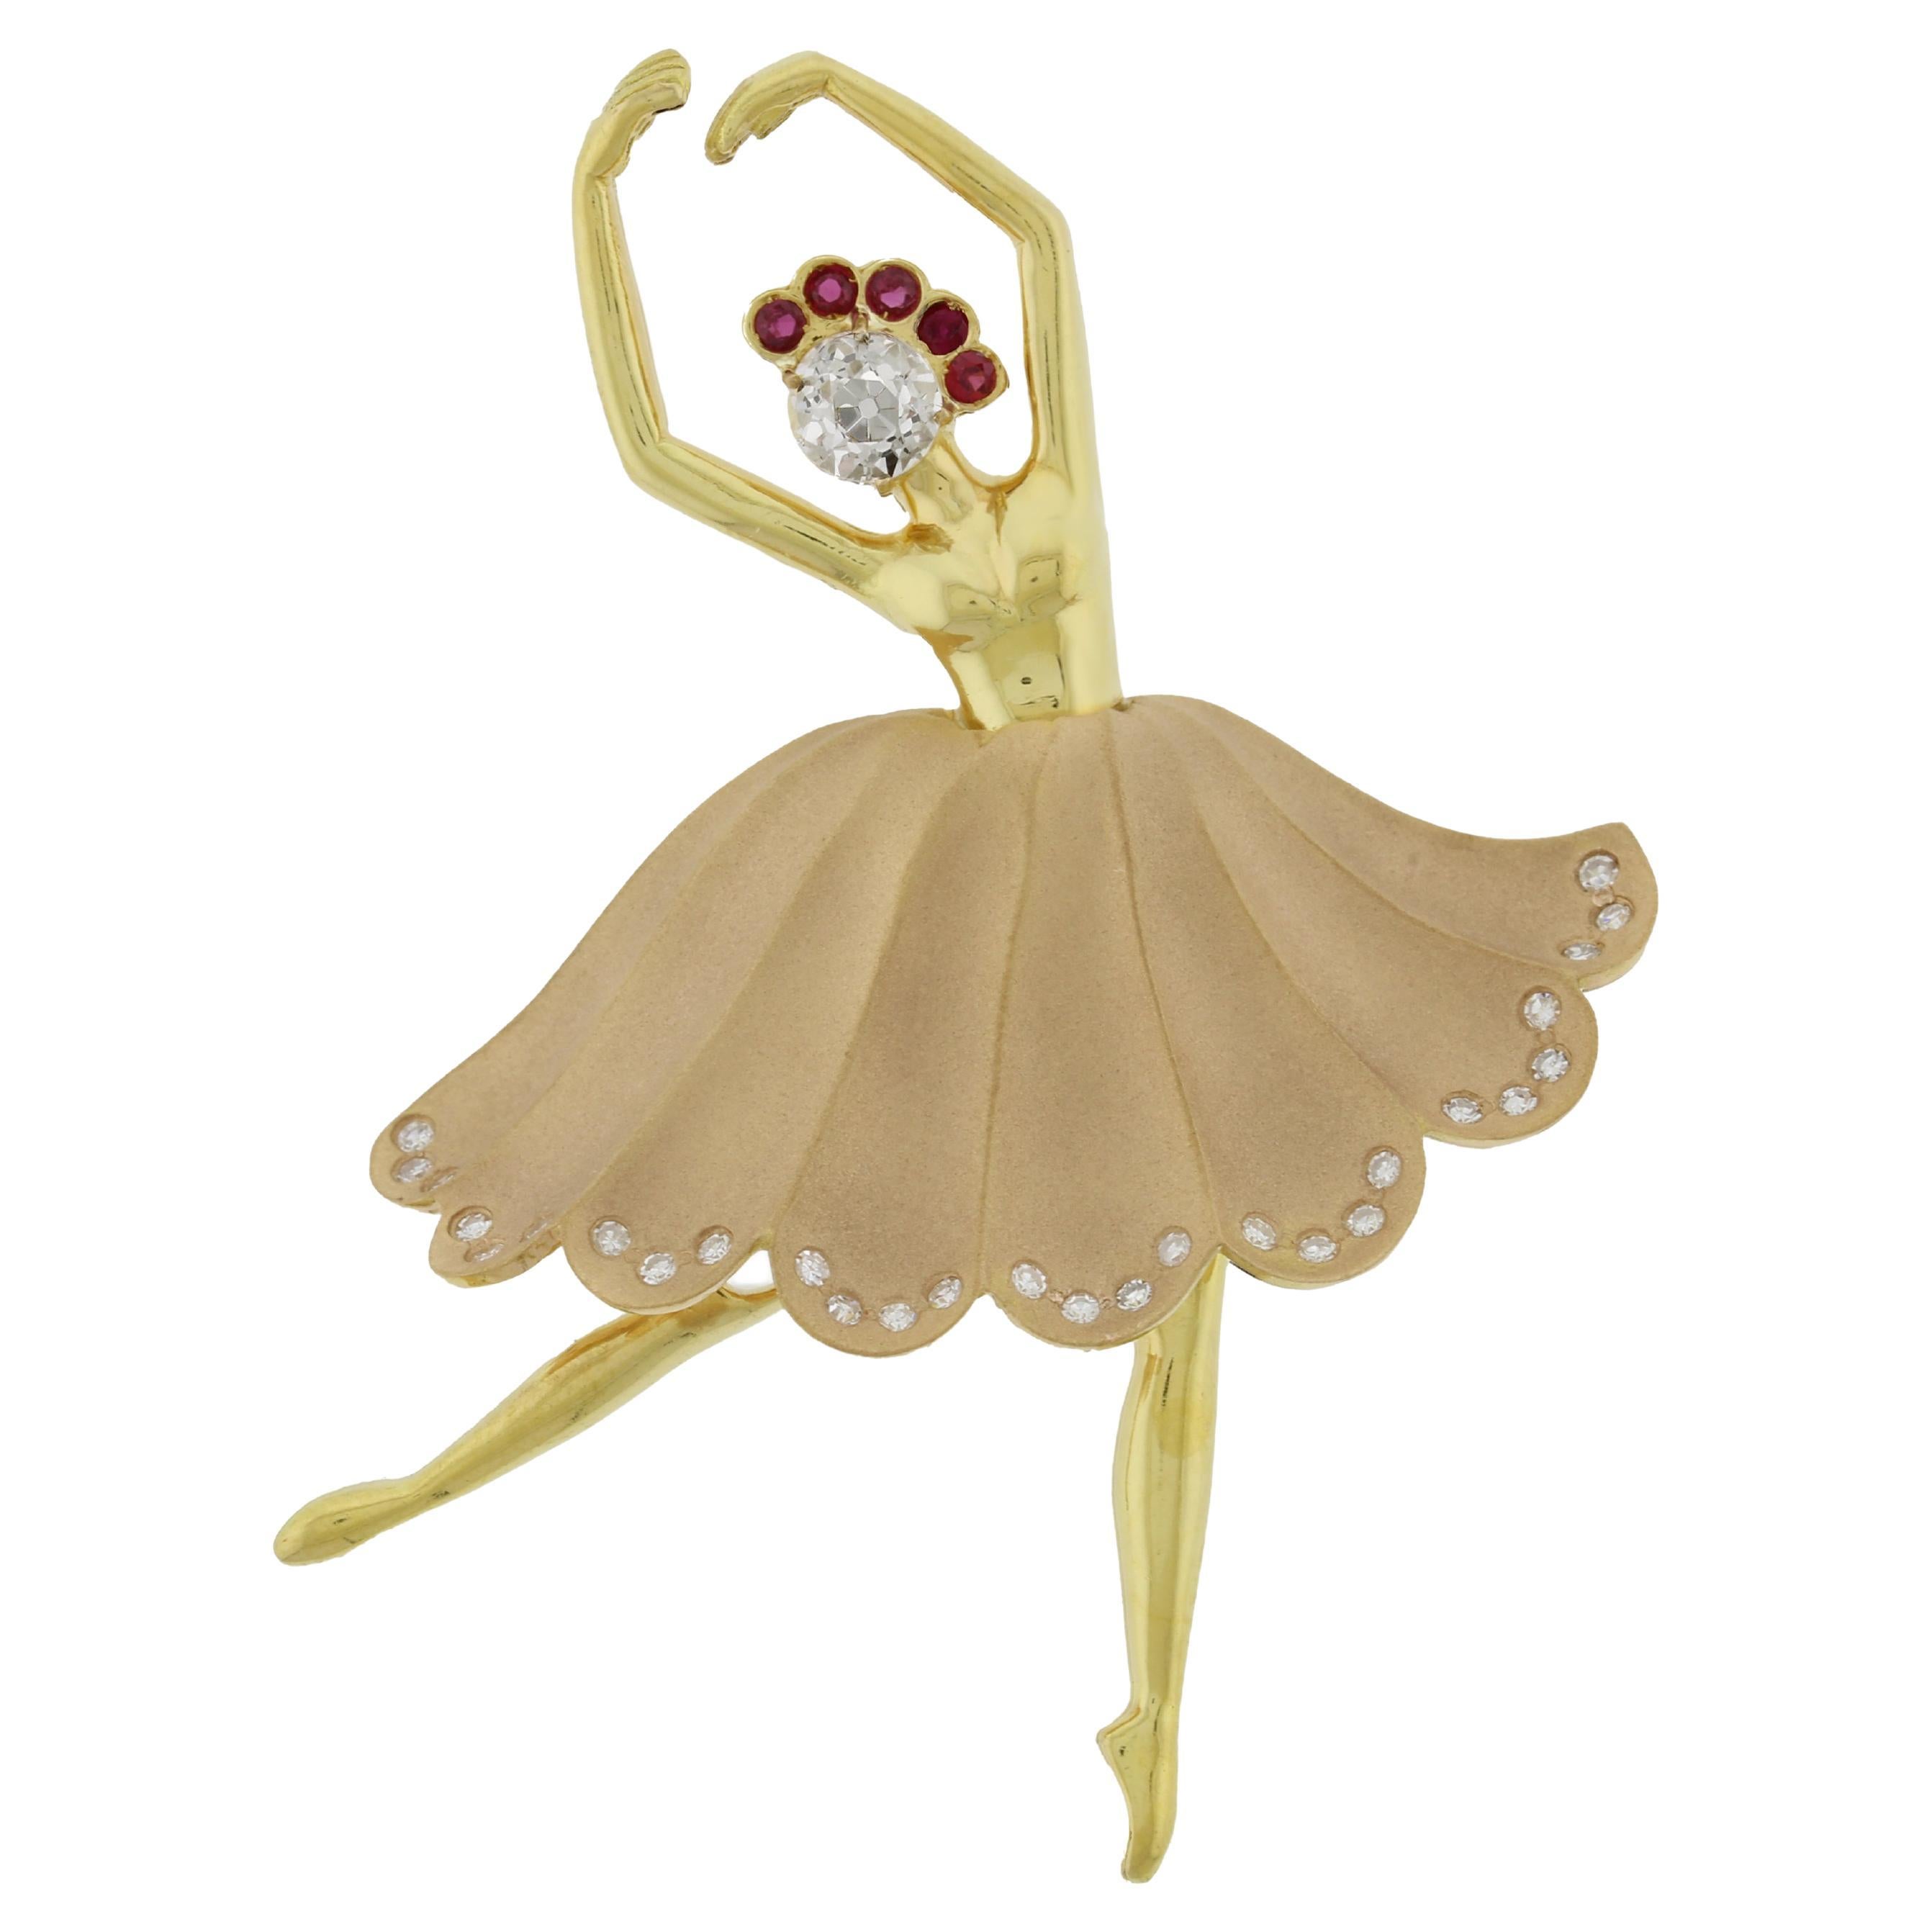 Diamond and Ruby Ballerina Brooch by Pampillonia Jewelers